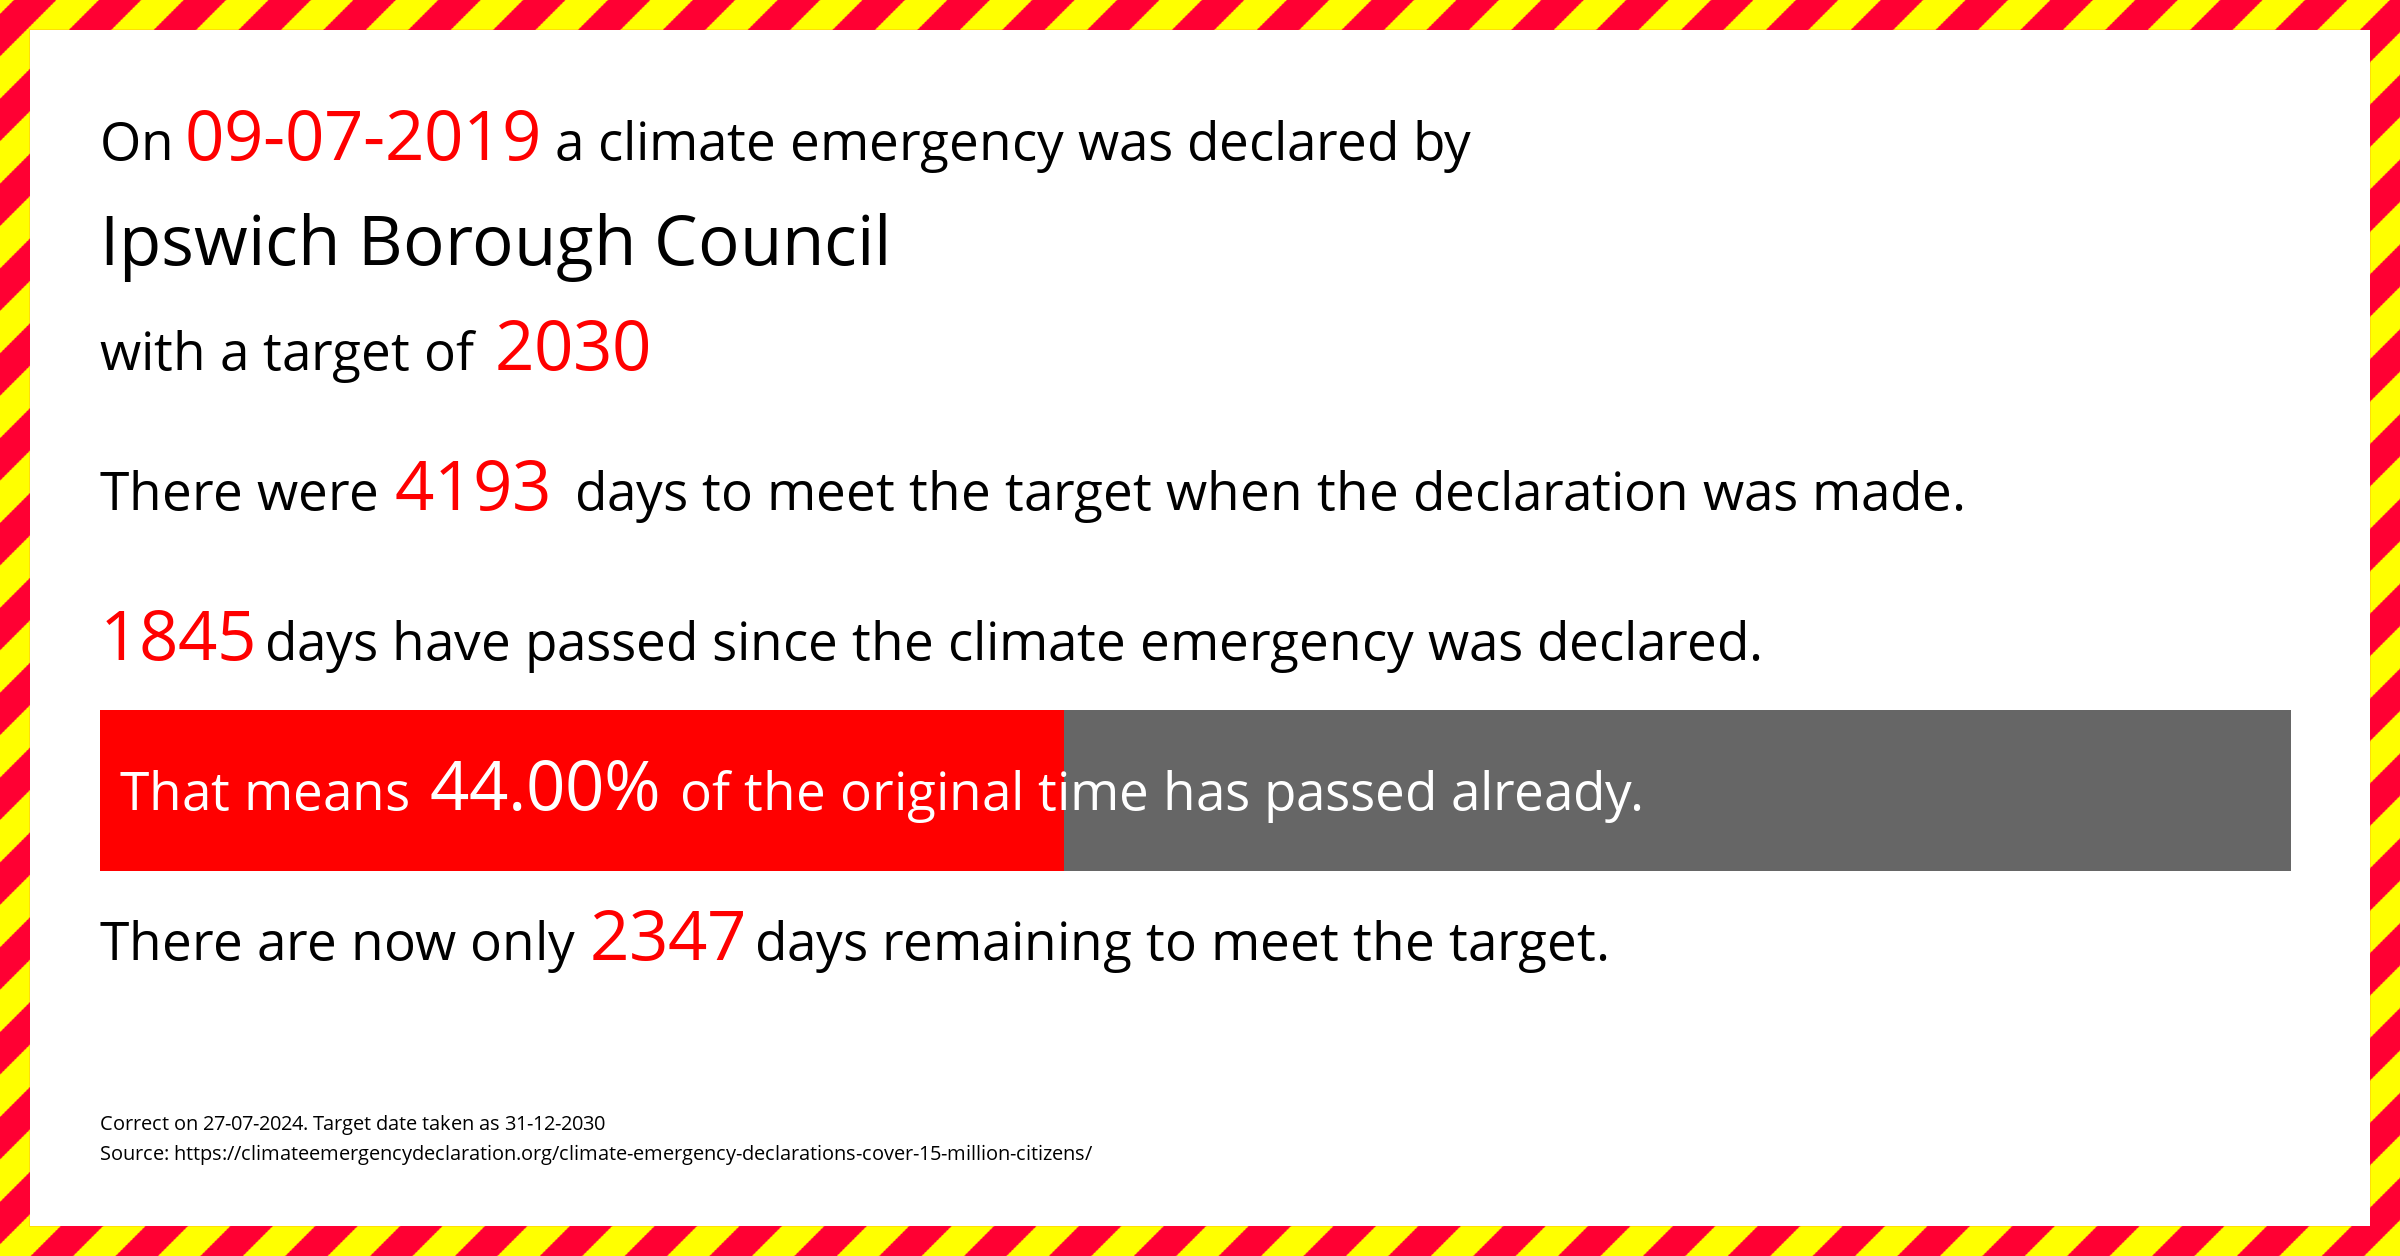 Ipswich Borough Council declared a Climate emergency on Tuesday 9th July 2019, with a target of 2030.